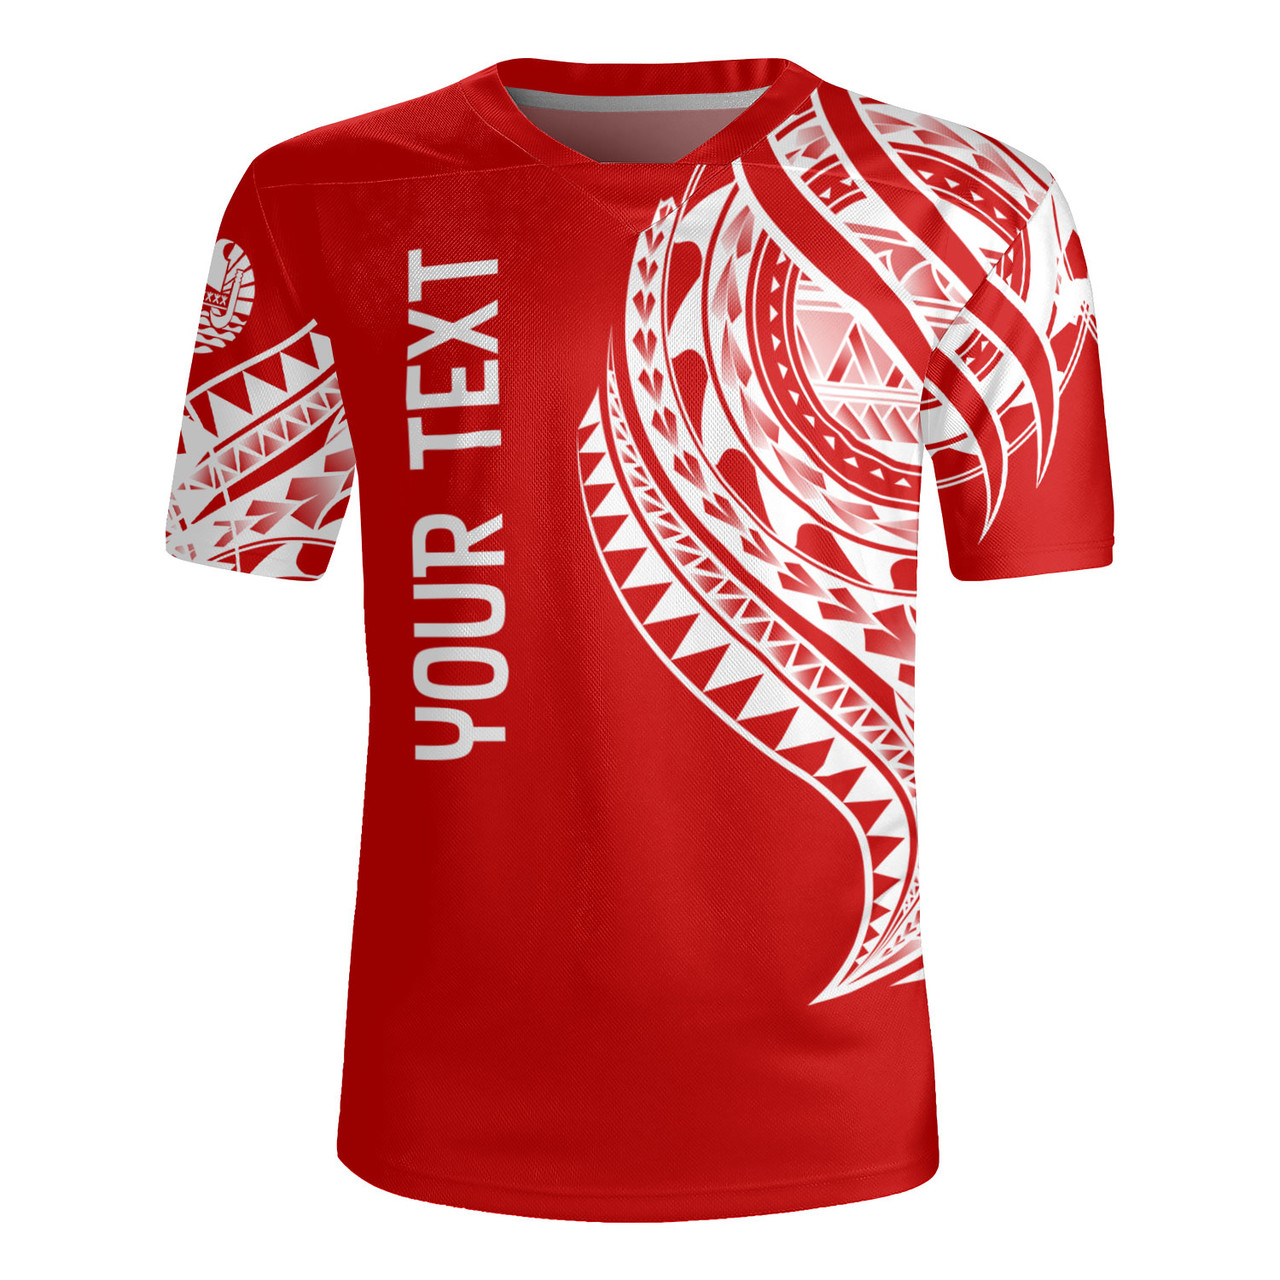 Tahiti Custom Personalised Rugby Jersey Tatau White Patterns With Coat Of Arms